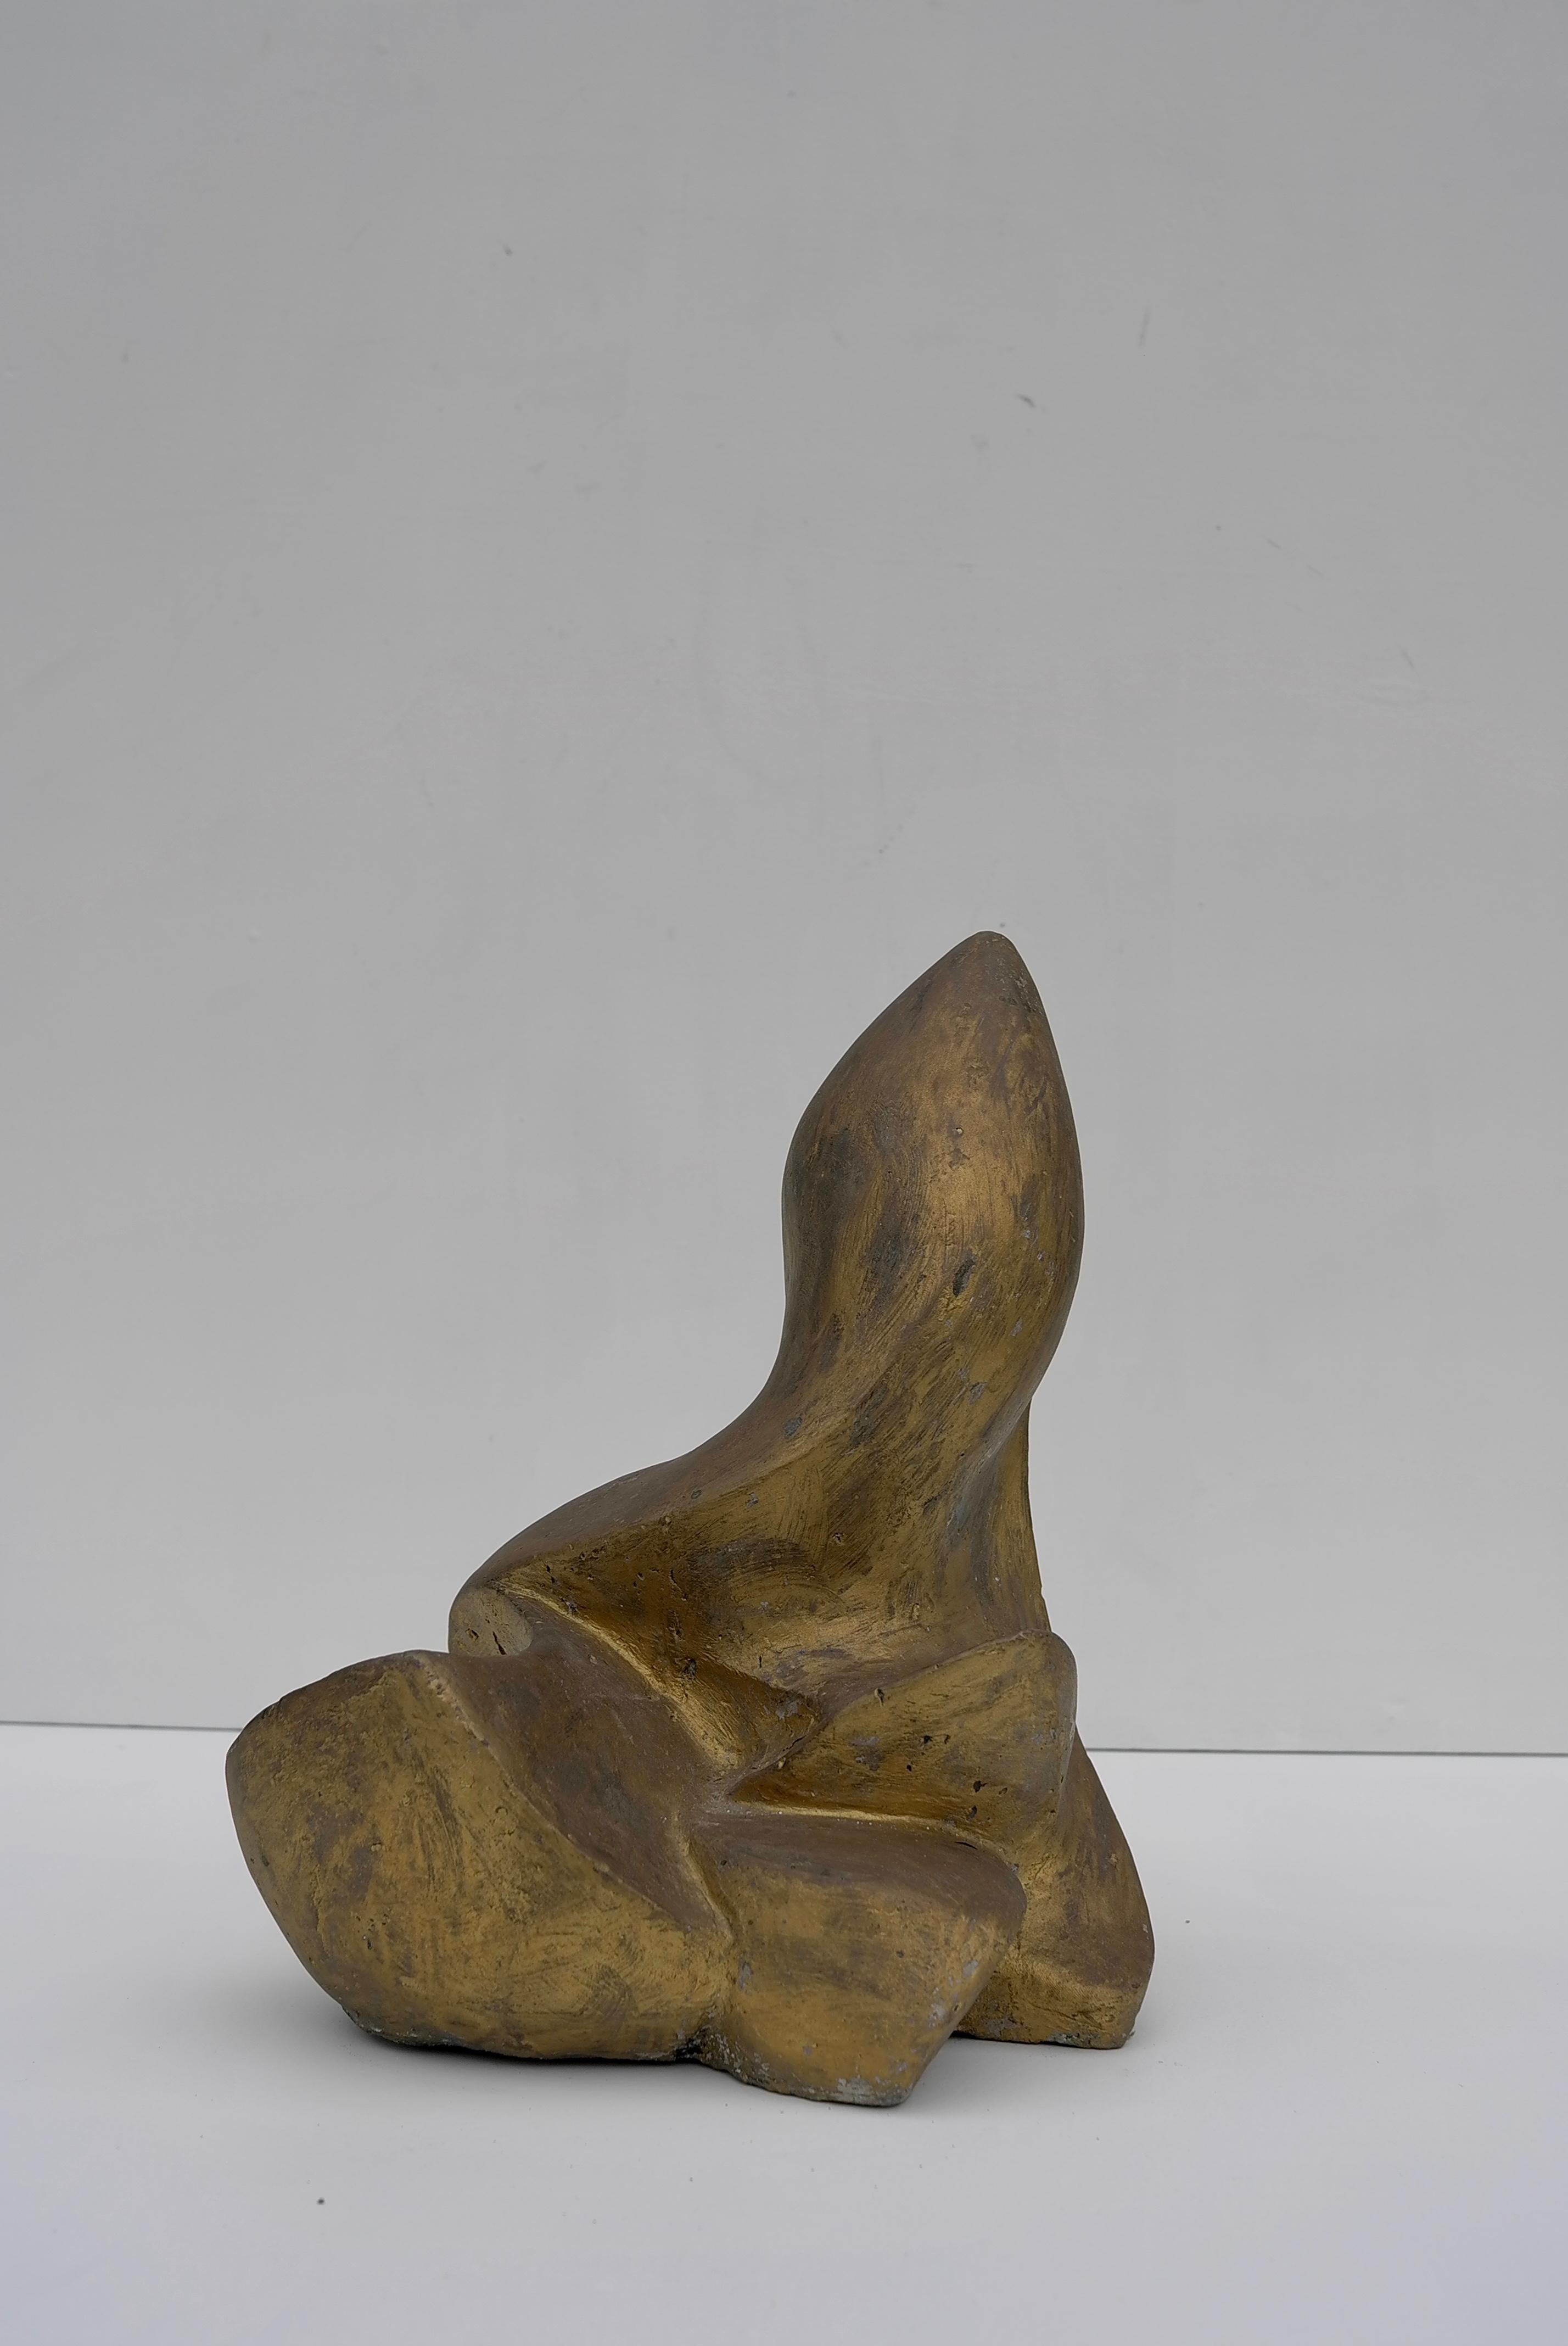 Concrete Mid-Century Modern Abstract Sculpture in Gold Color, Netherlands 1960's For Sale 4